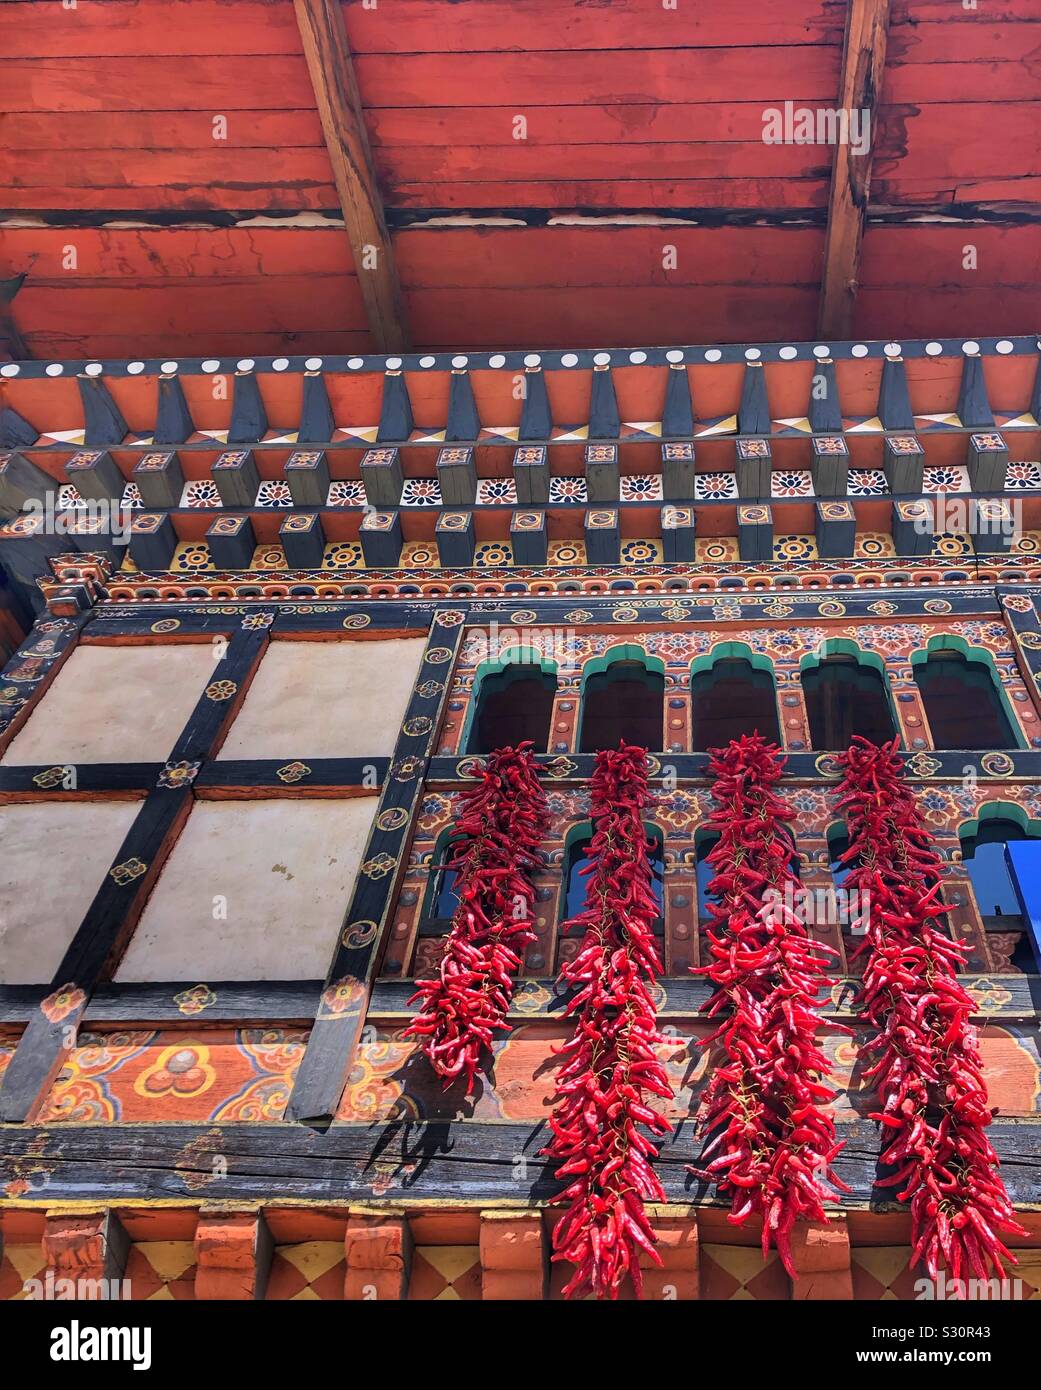 Chili peppers hanging out a window to dry in Paro, Bhutan. Stock Photo